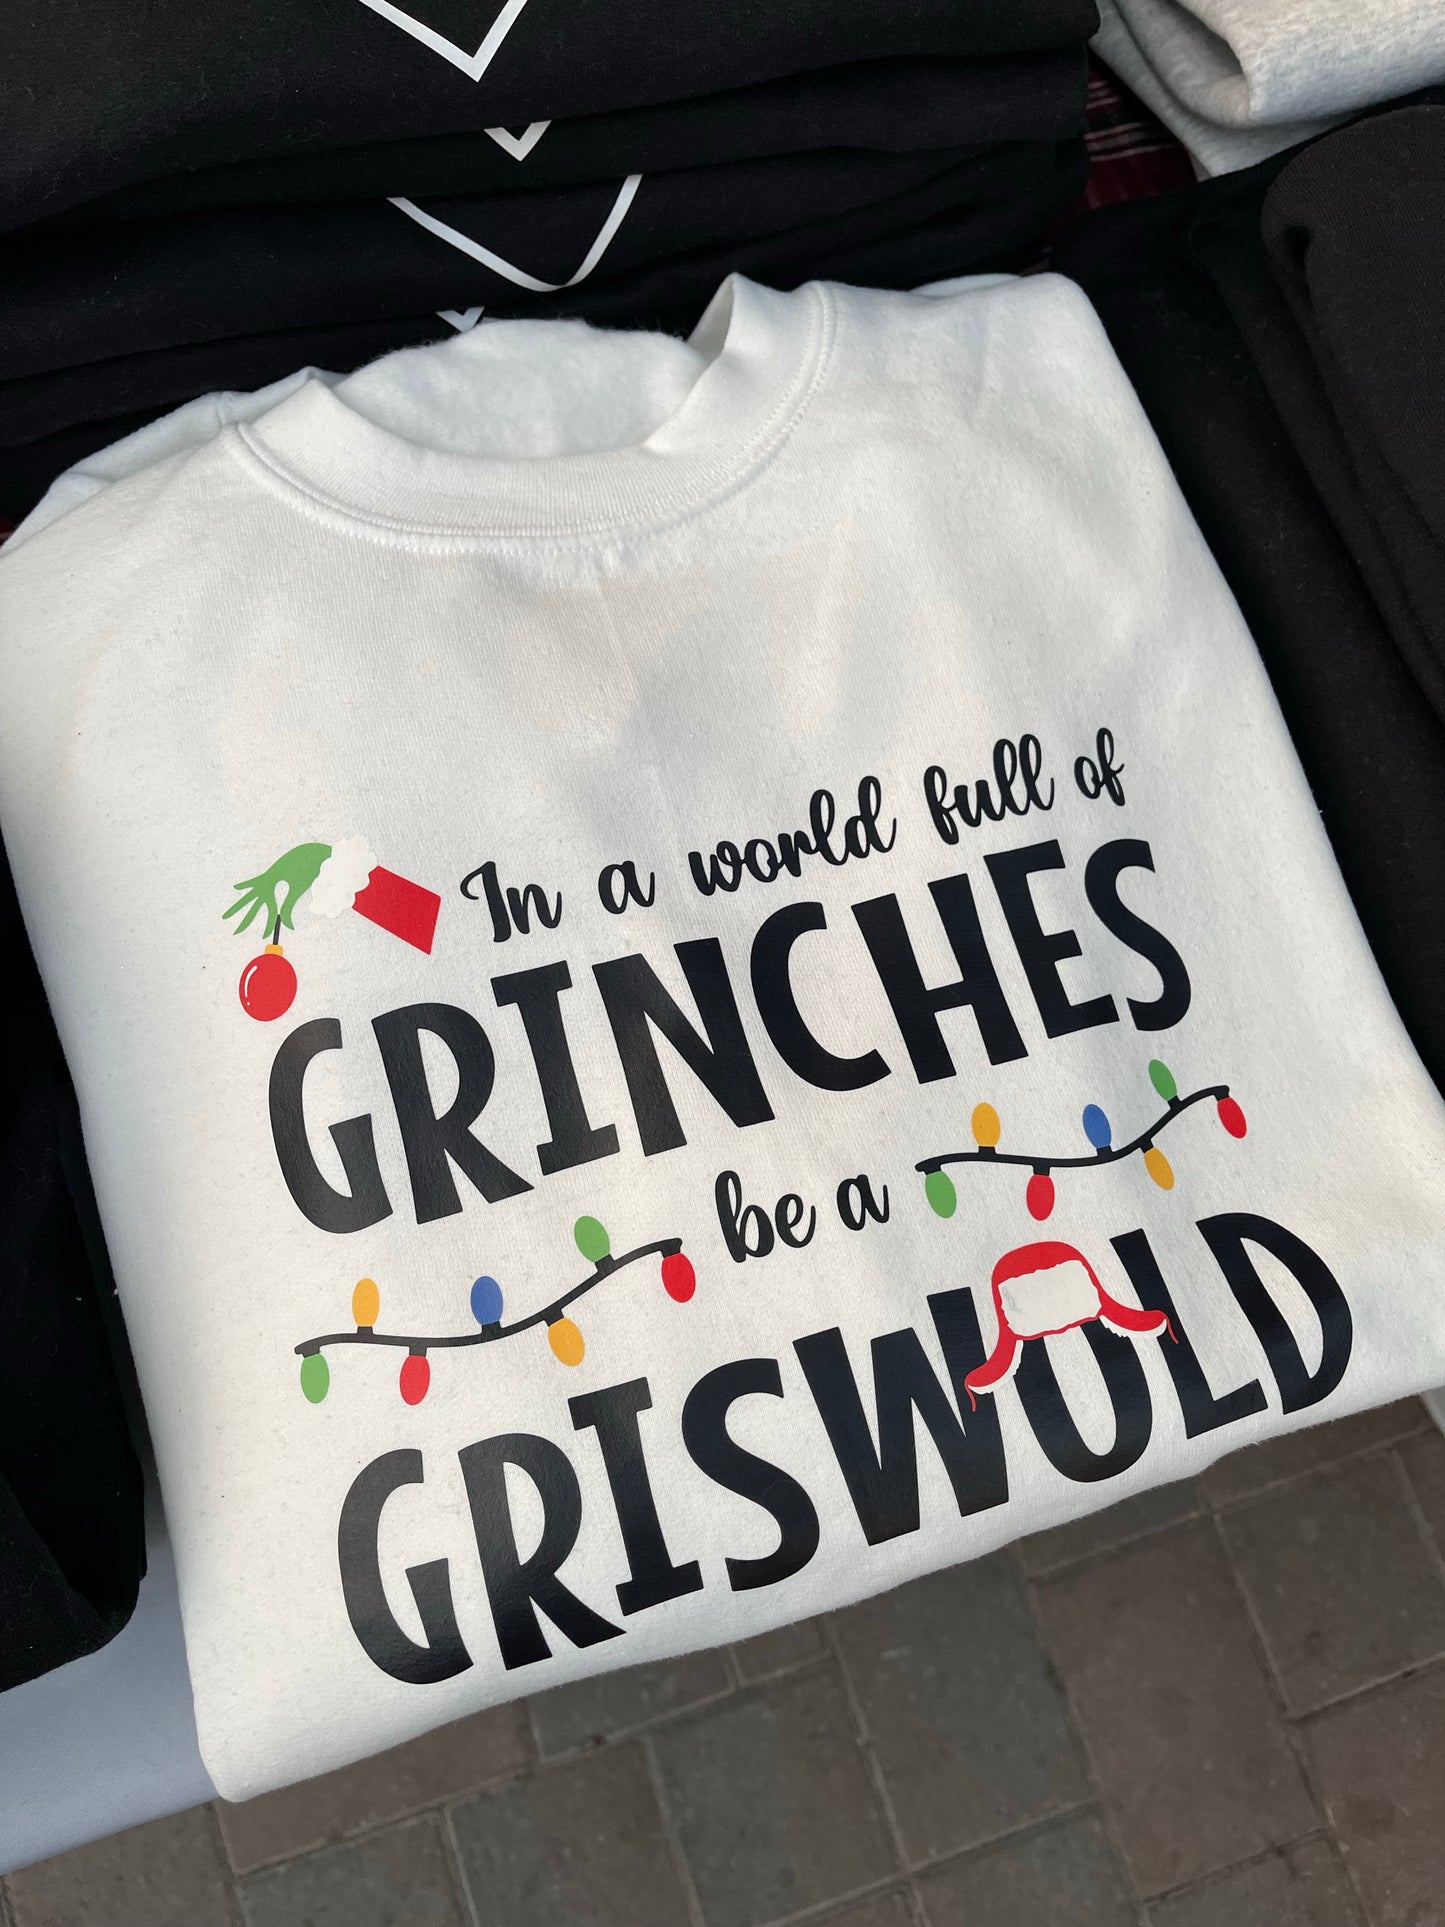 Grinches vs. Griswold on White Crewneck